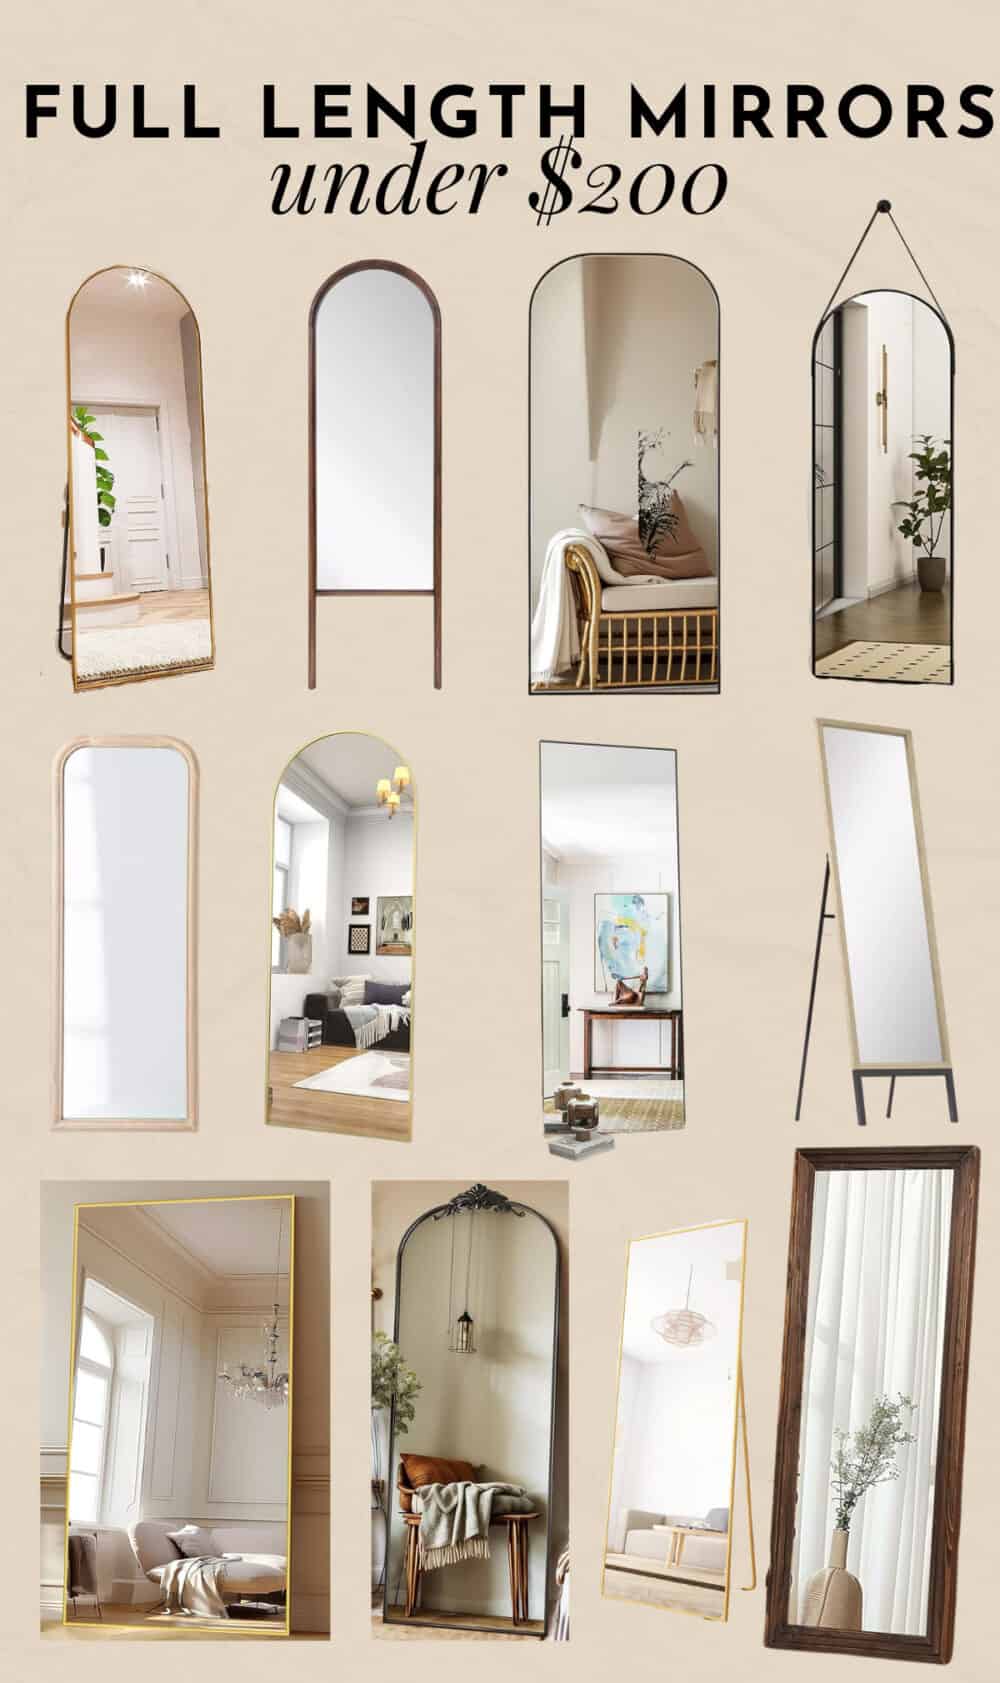 collection of full length mirrors under $200 